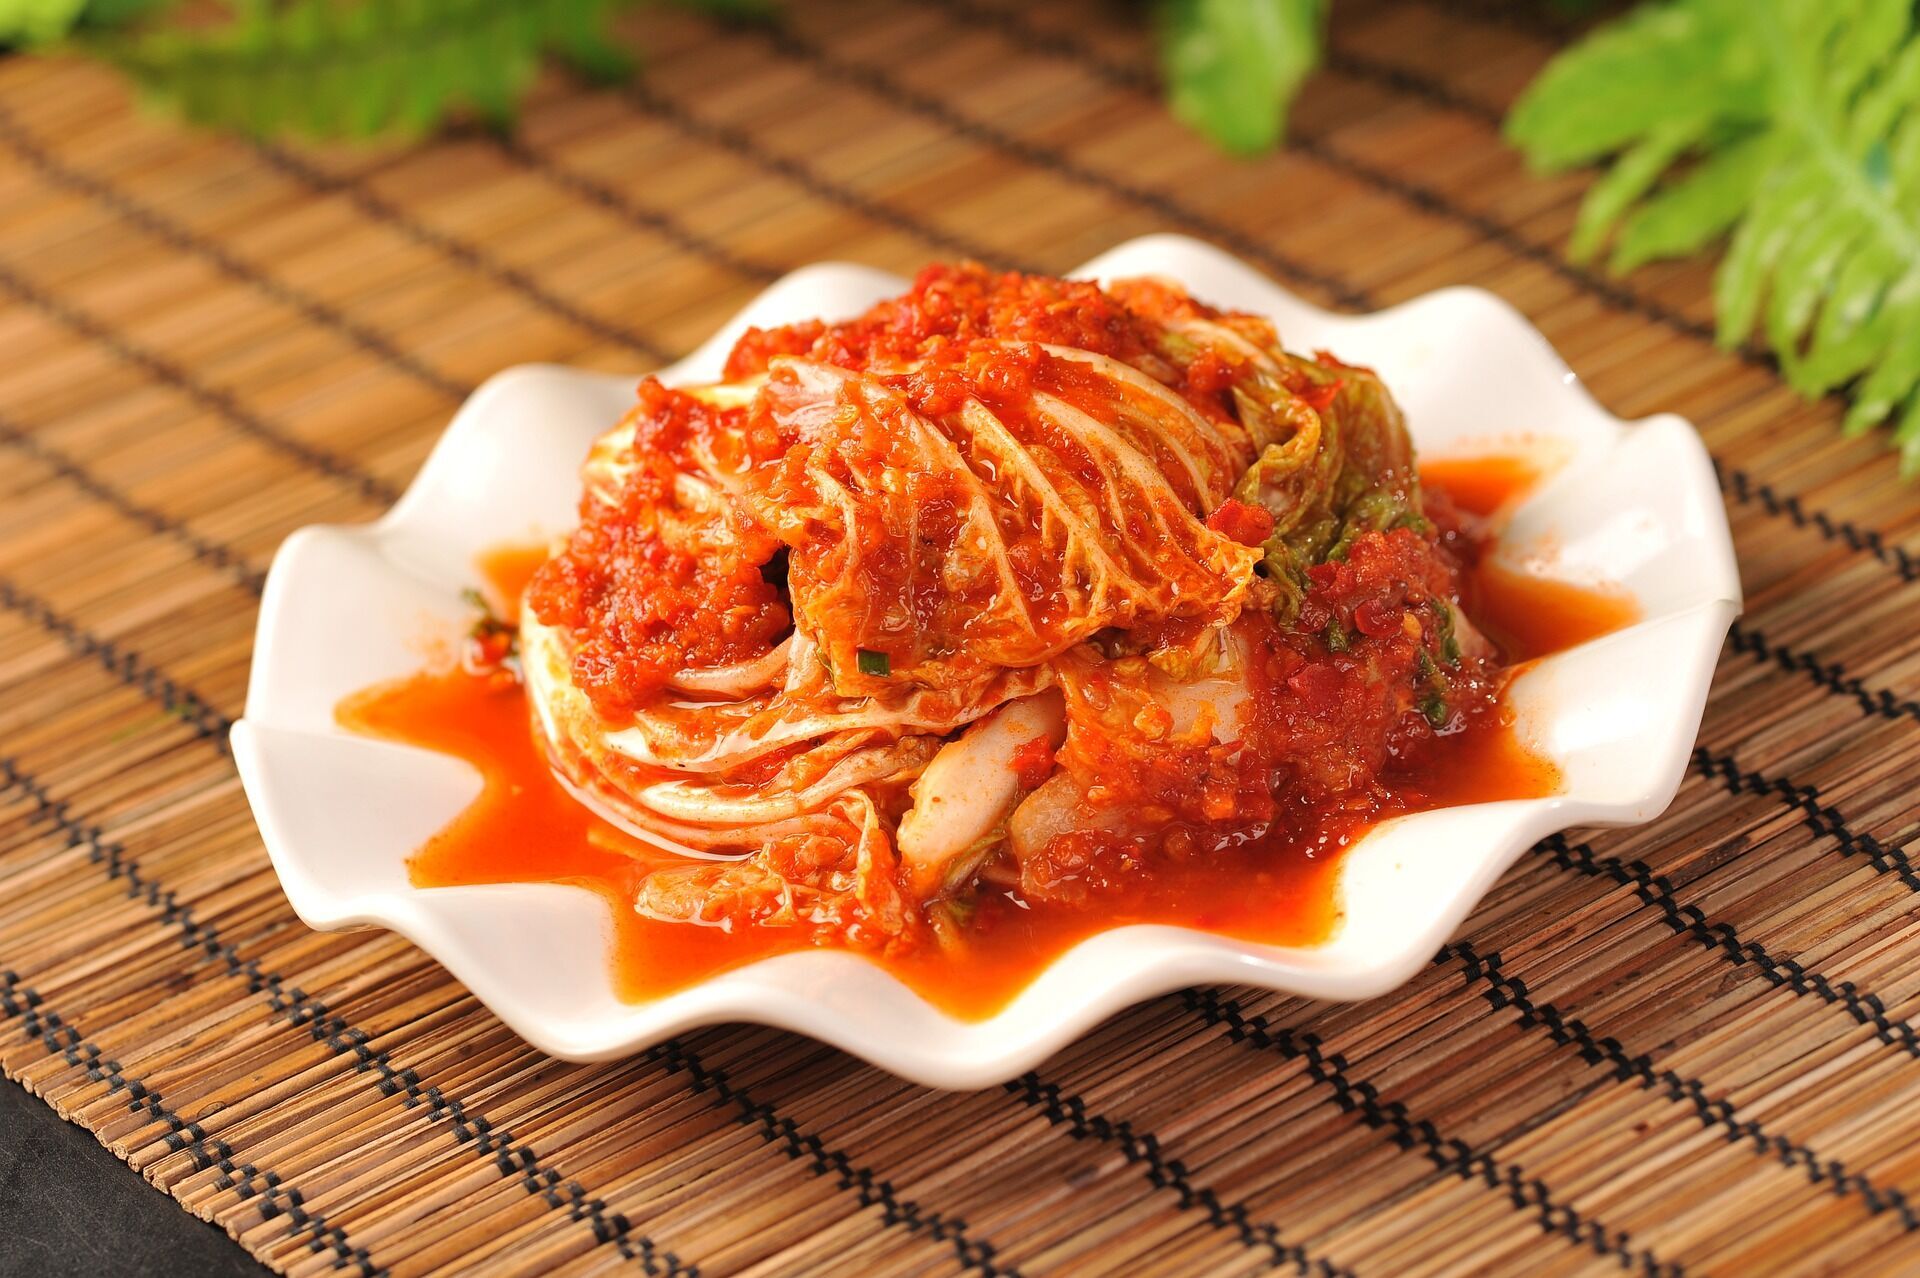 Kimchi made from Chinese cabbage